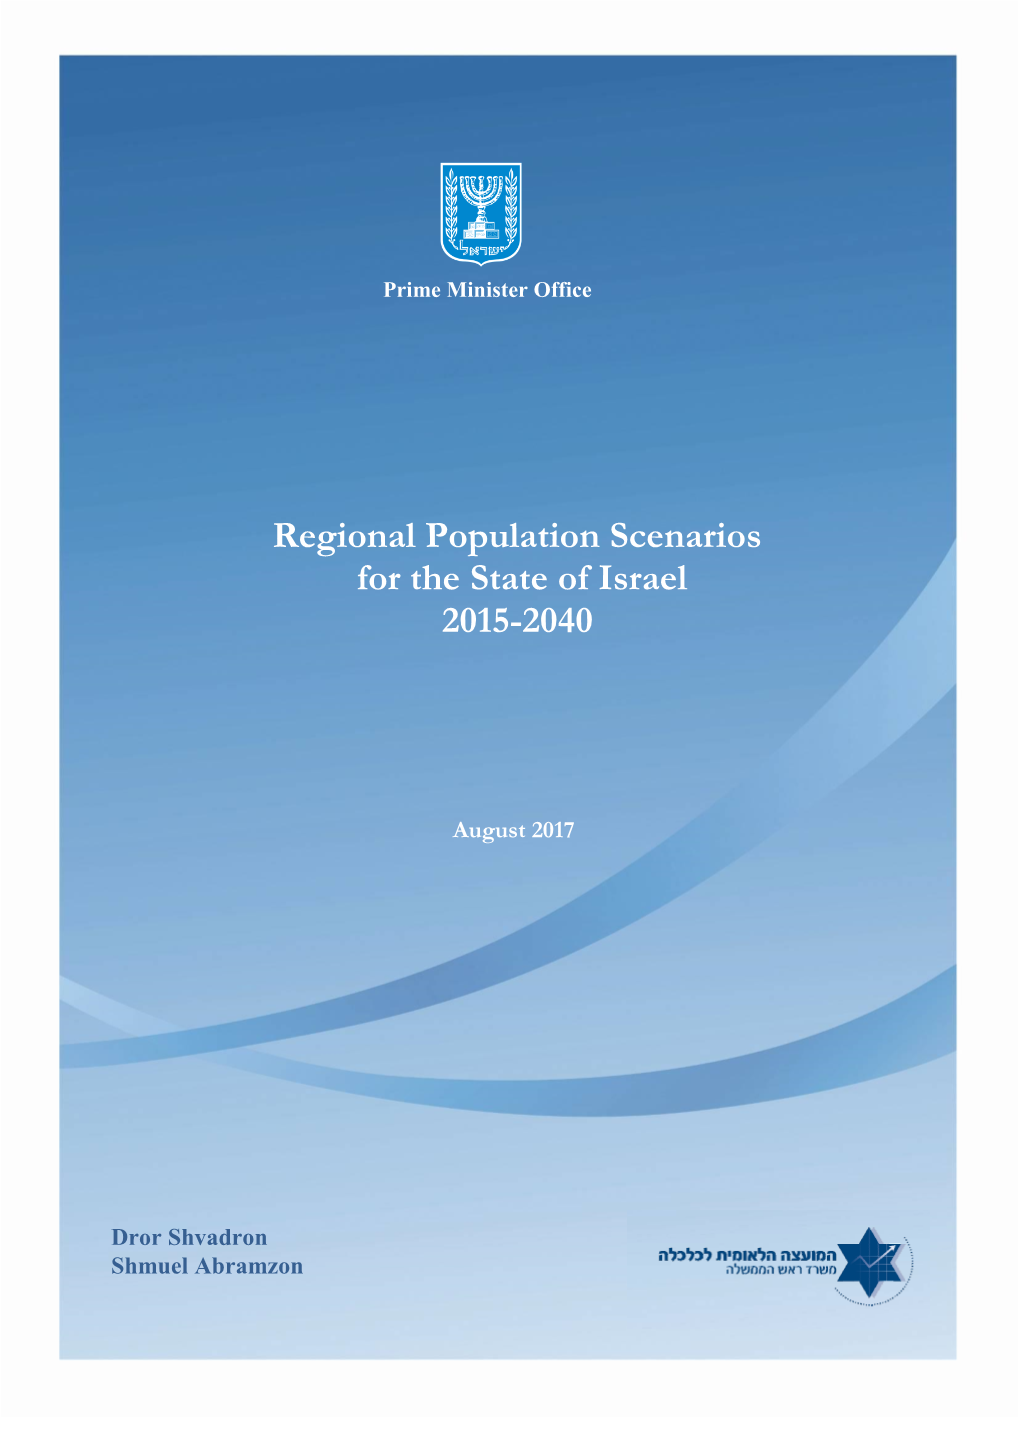 Regional Population Scenarios for the State of Israel 2015-2040